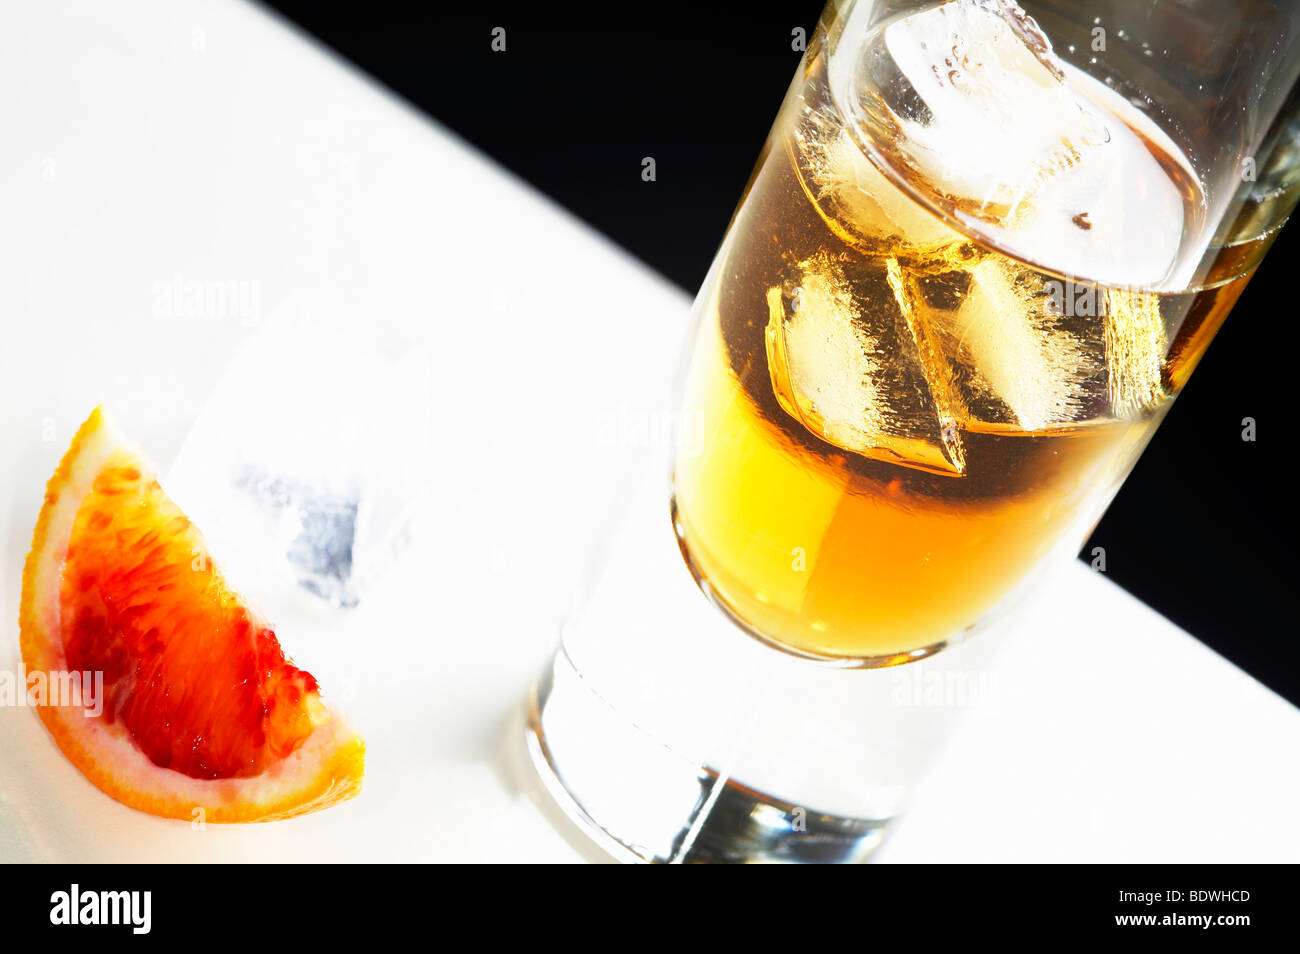 Iced, orange long drink with a slice of blood orange Stock Photo